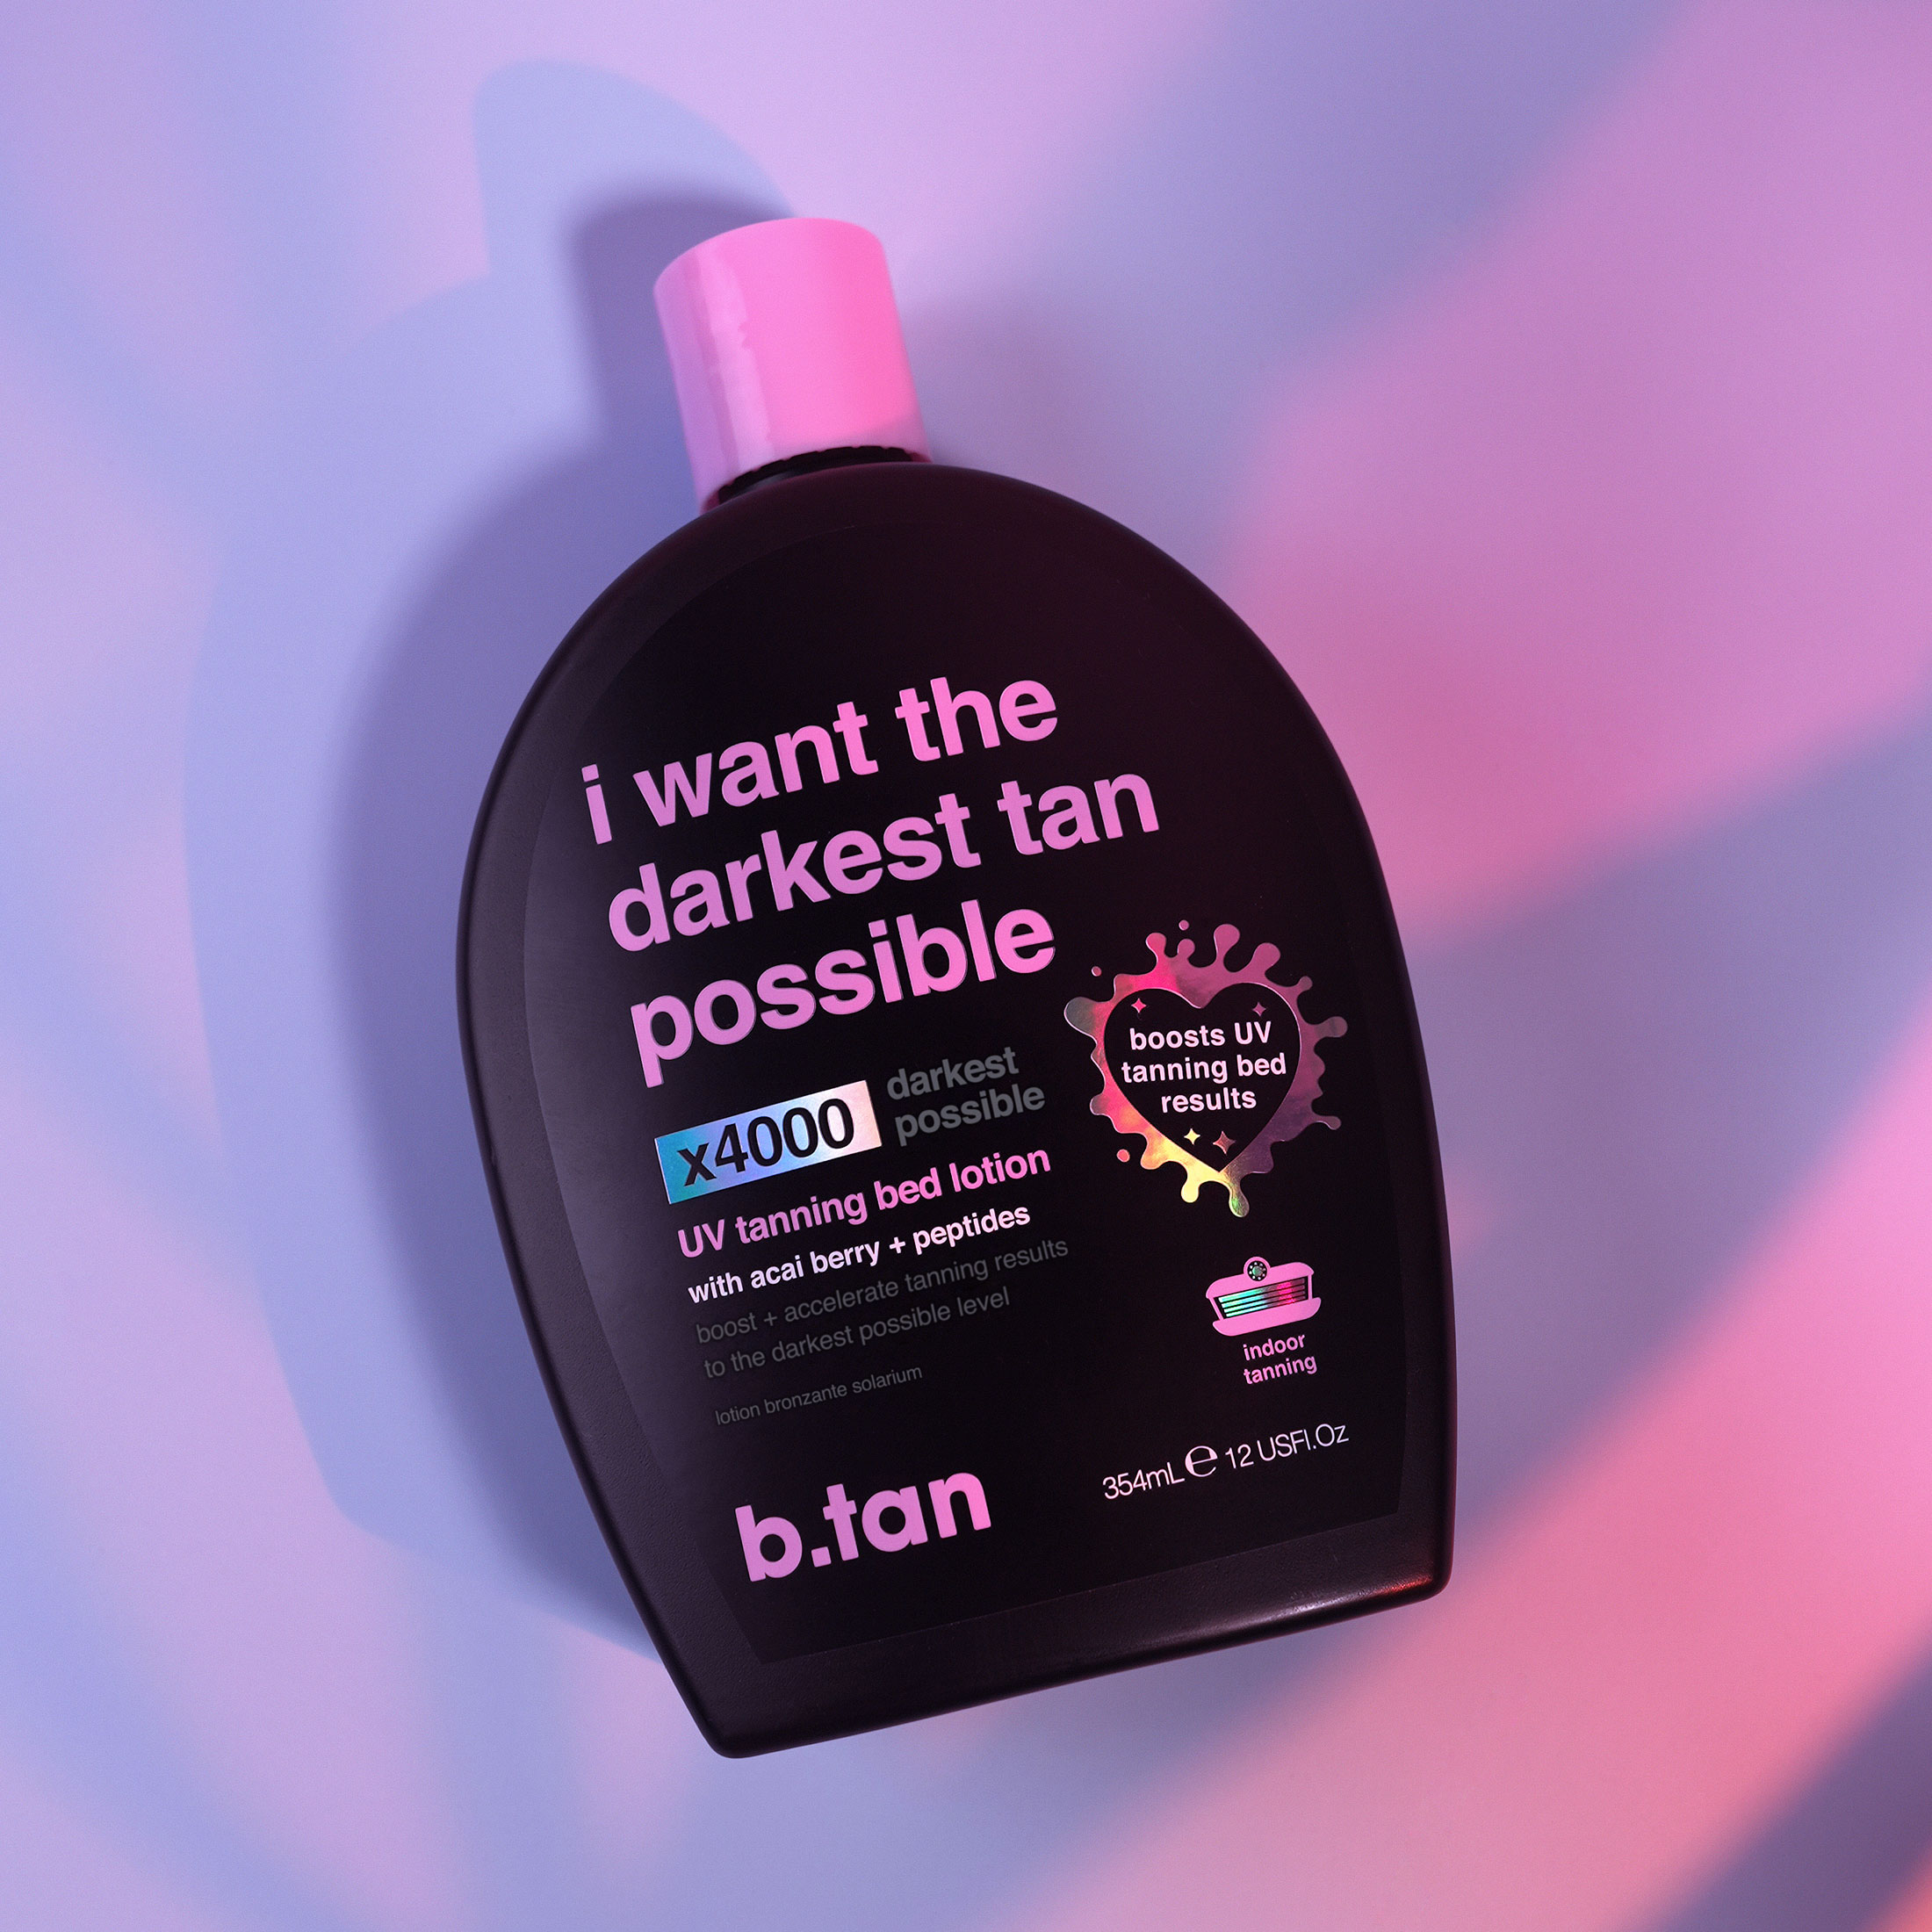 Berry　Possible　Lotion　Darkest　Acai　Tanning　UV　with　The　Bed　I　Peptides　Want　Tan